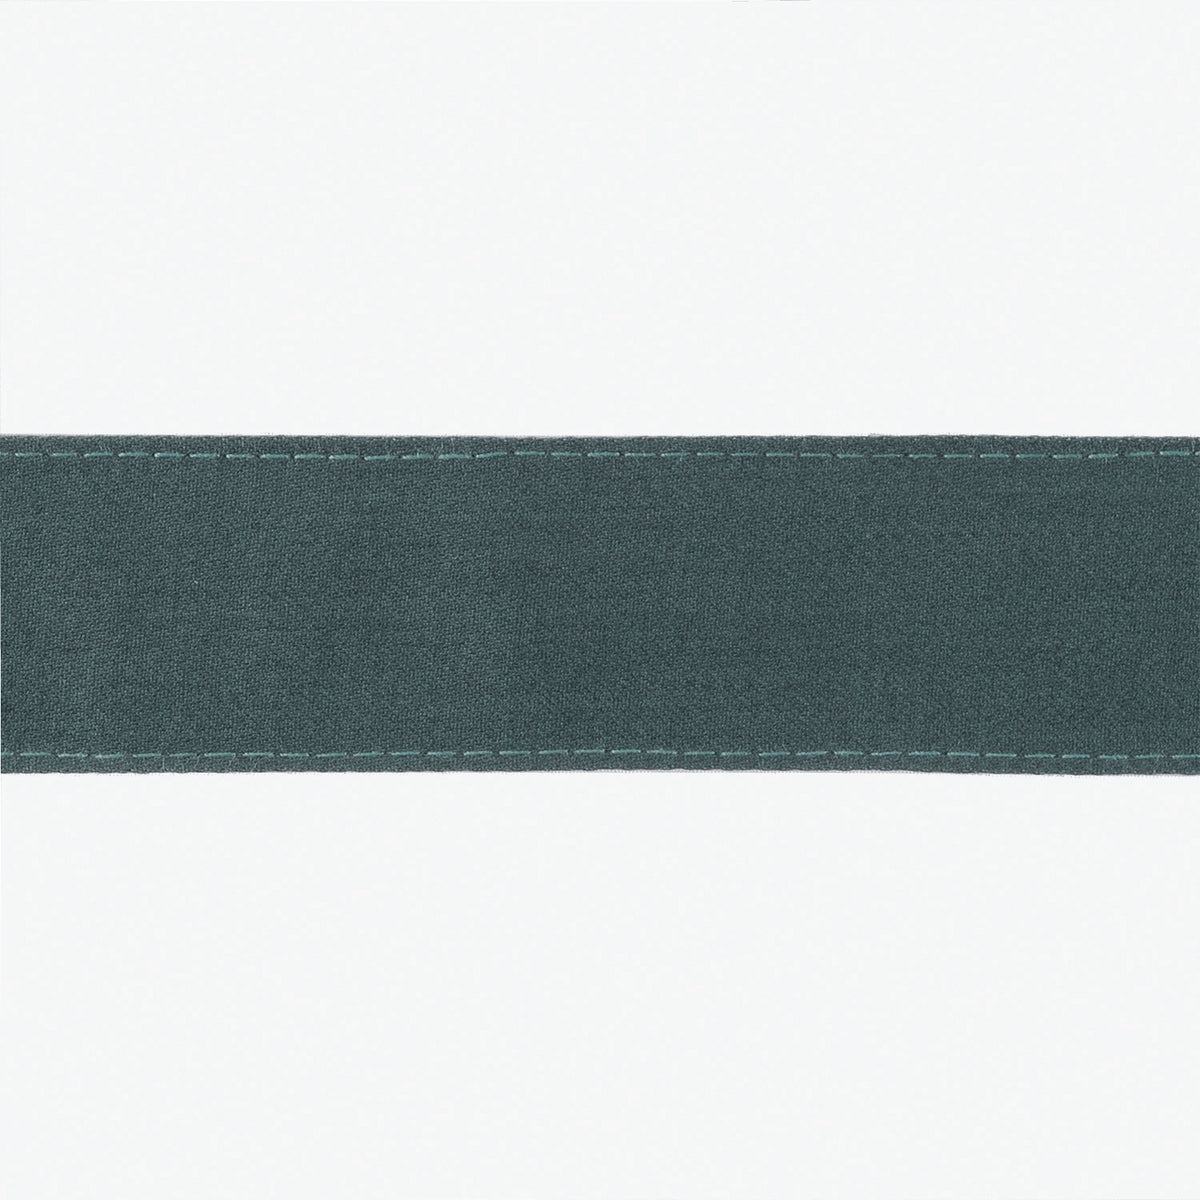 Swatch Sample of Matouk Lowell Tissue Box Cover in Color Deep Jade